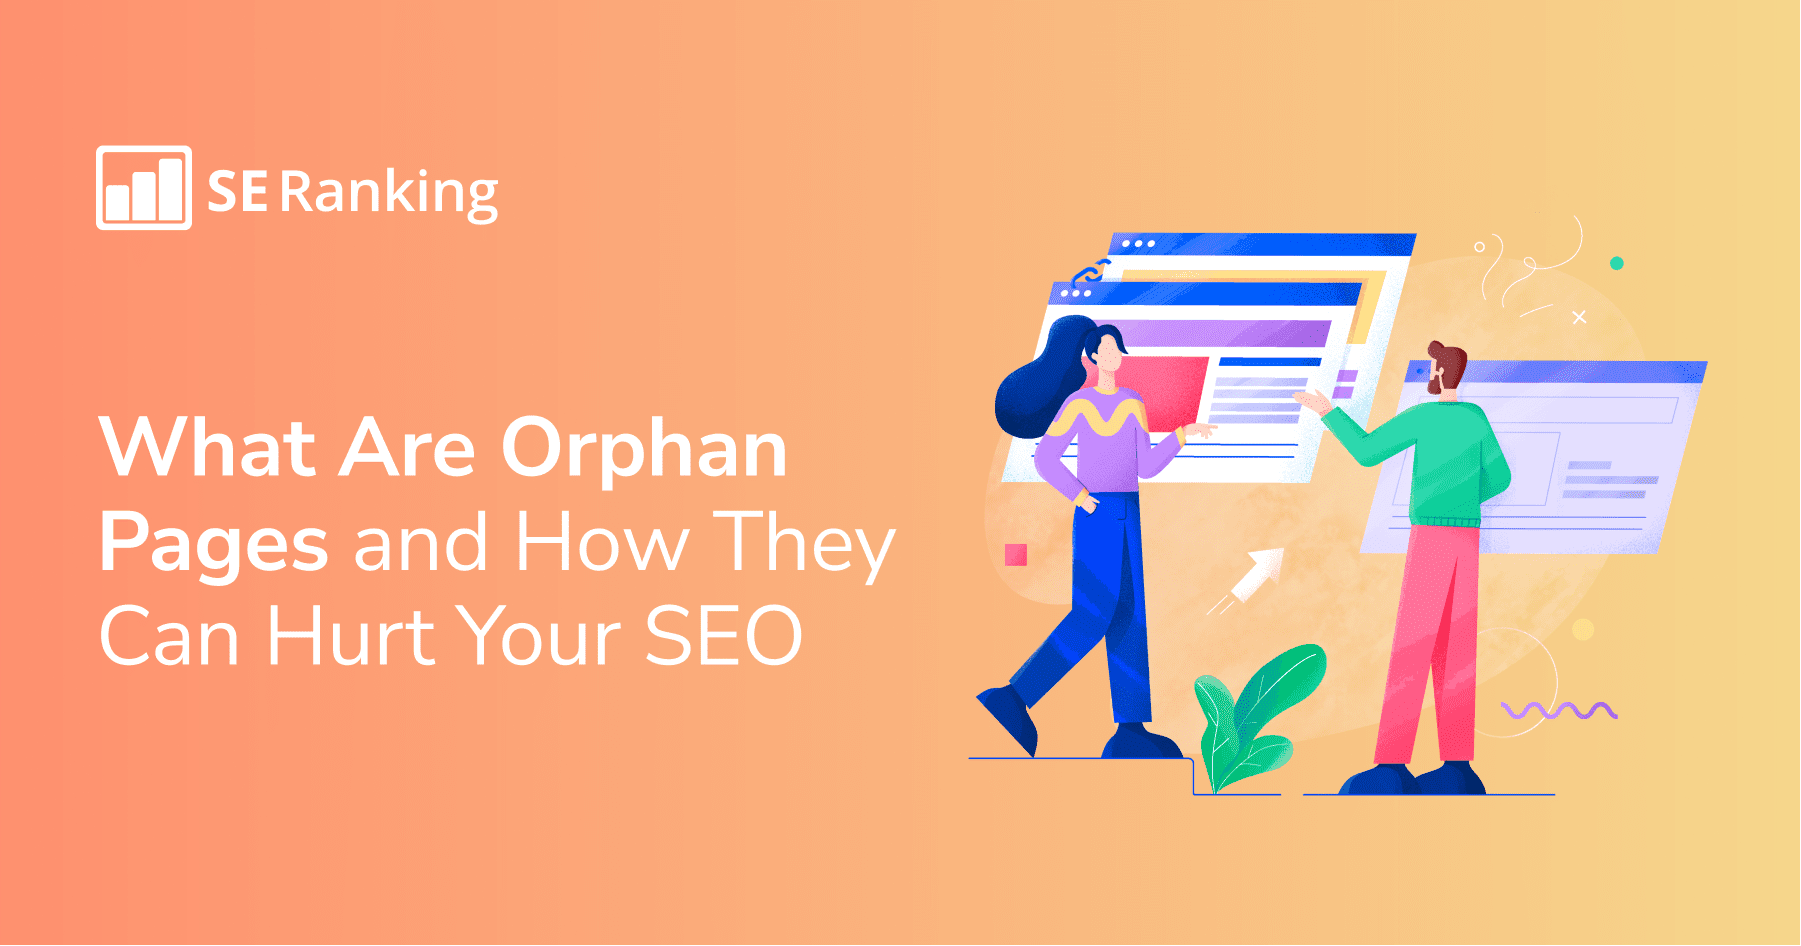 Orphan Pages: How to Quickly Find and Fix Them